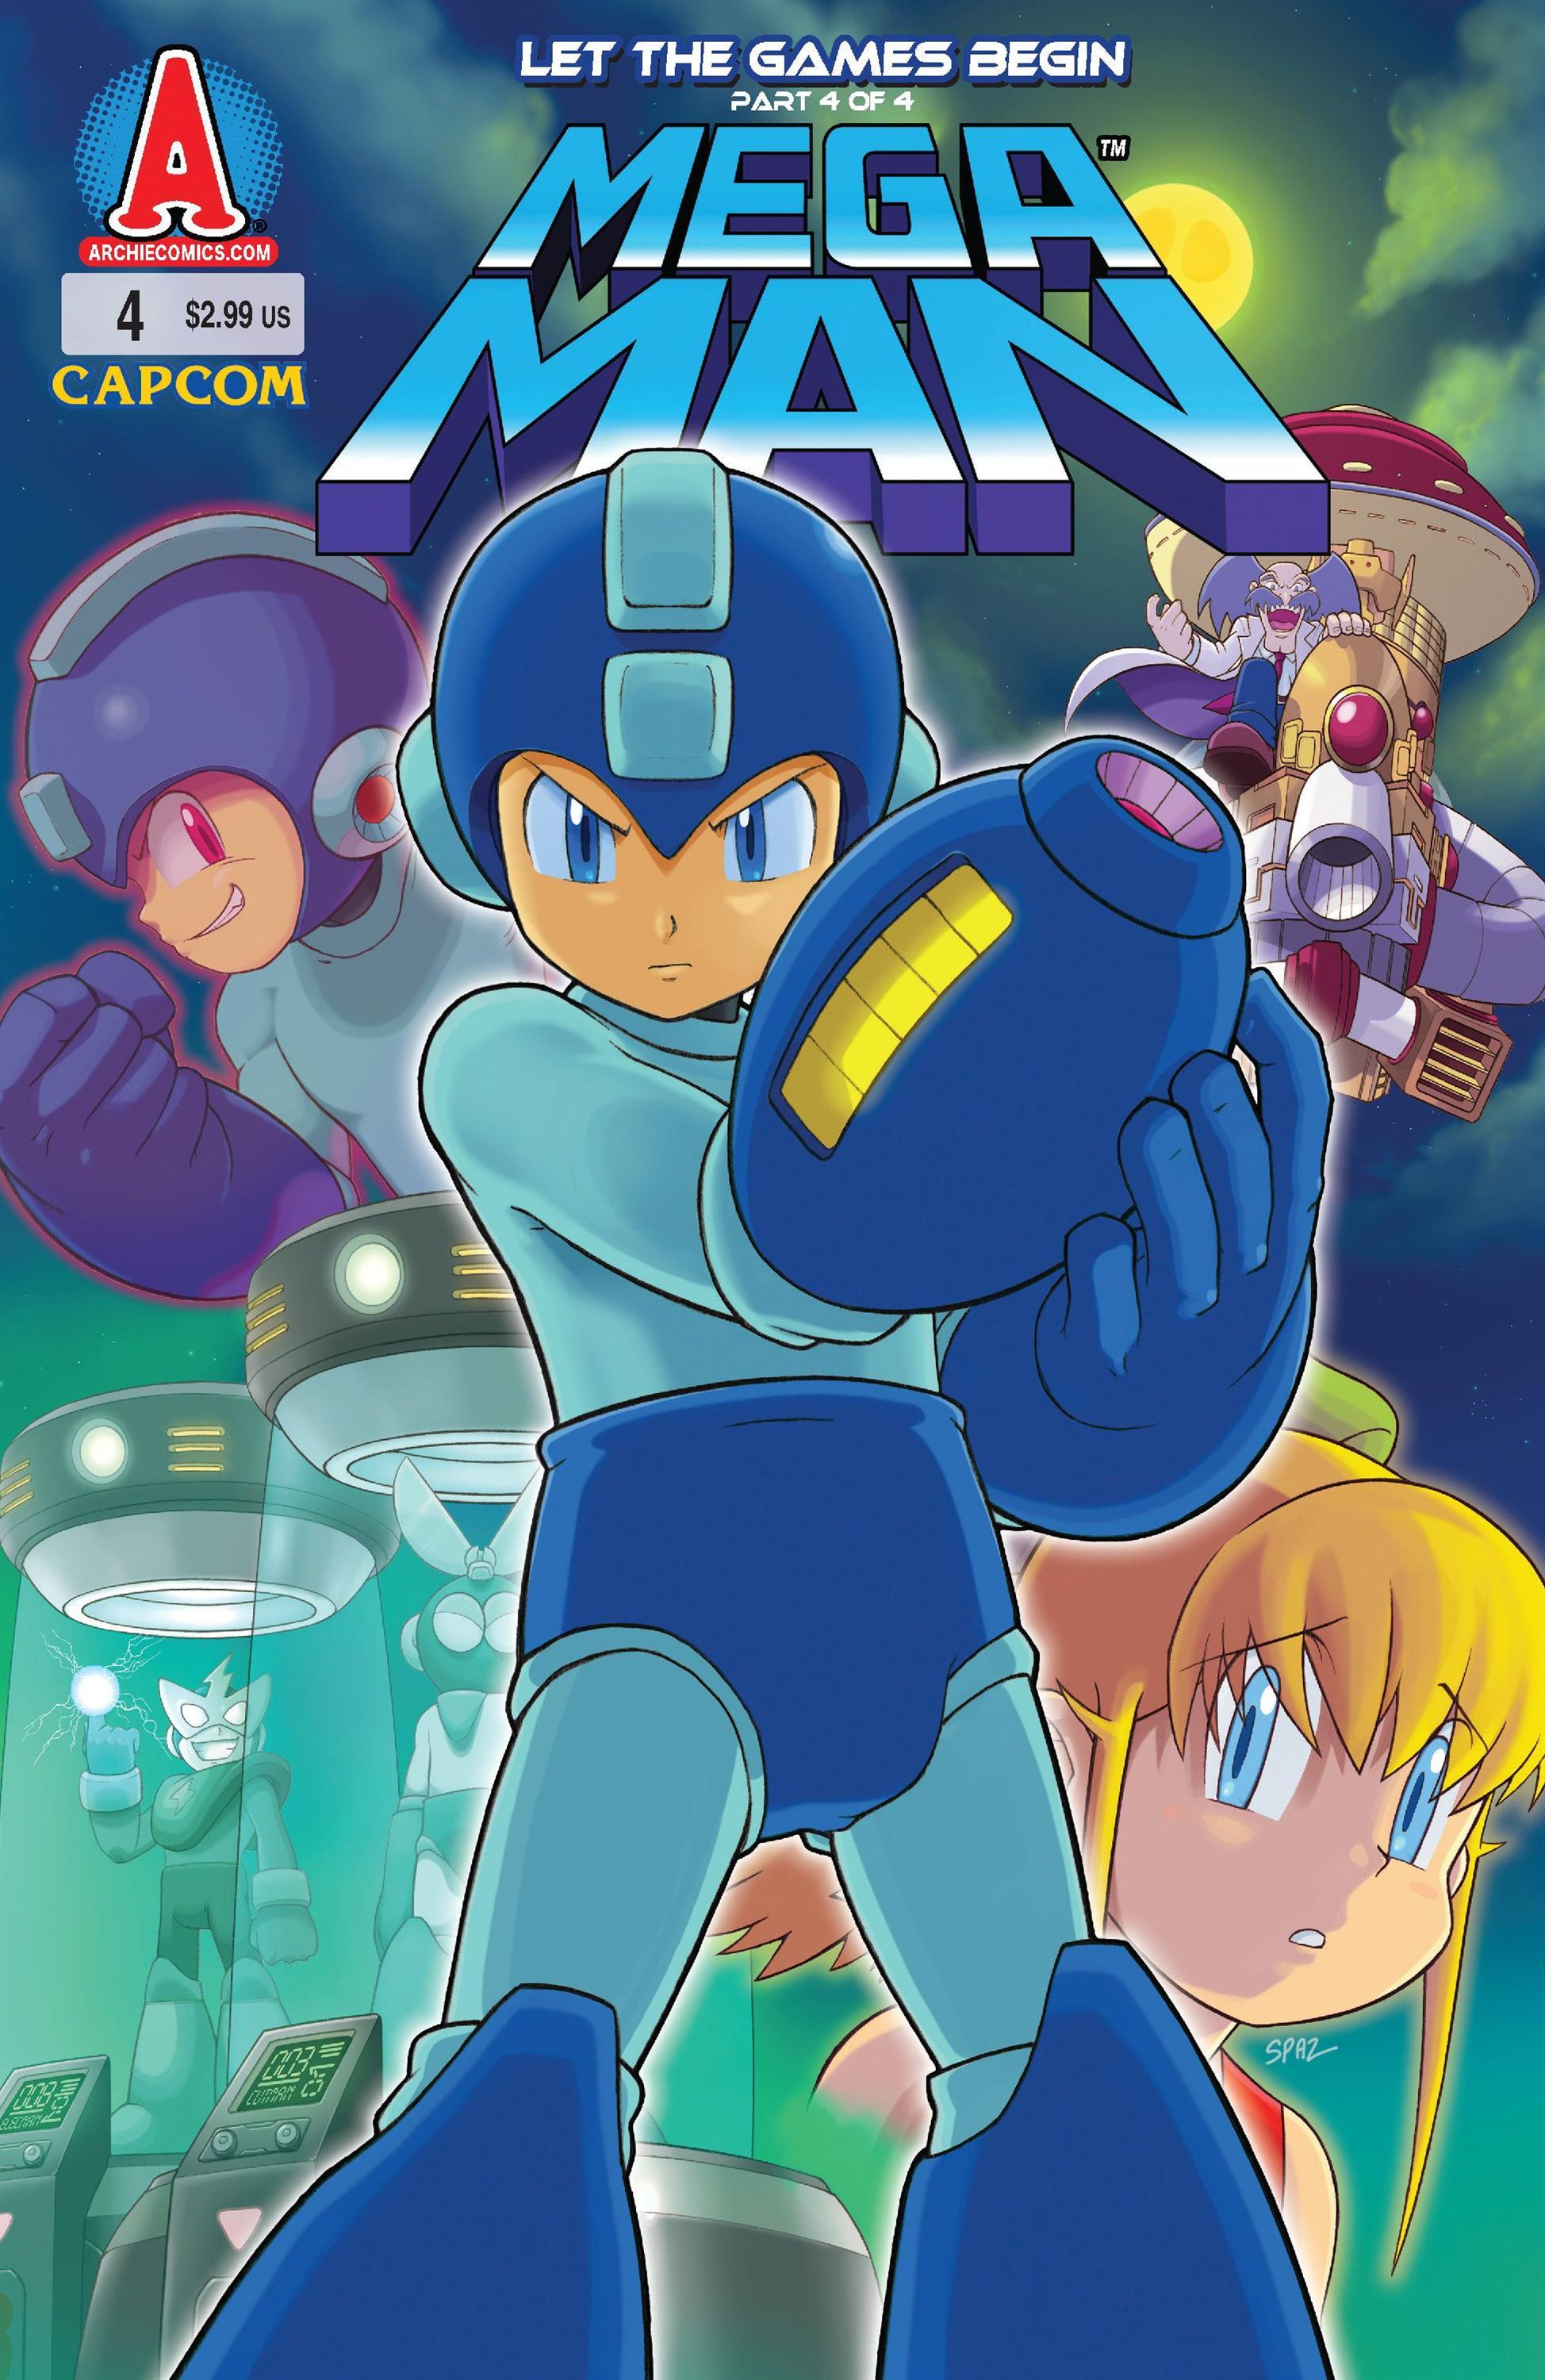 Archie Mega Man Issue 004 Blue Bomber Comics Wiki Fandom Powered By Wikia 9302